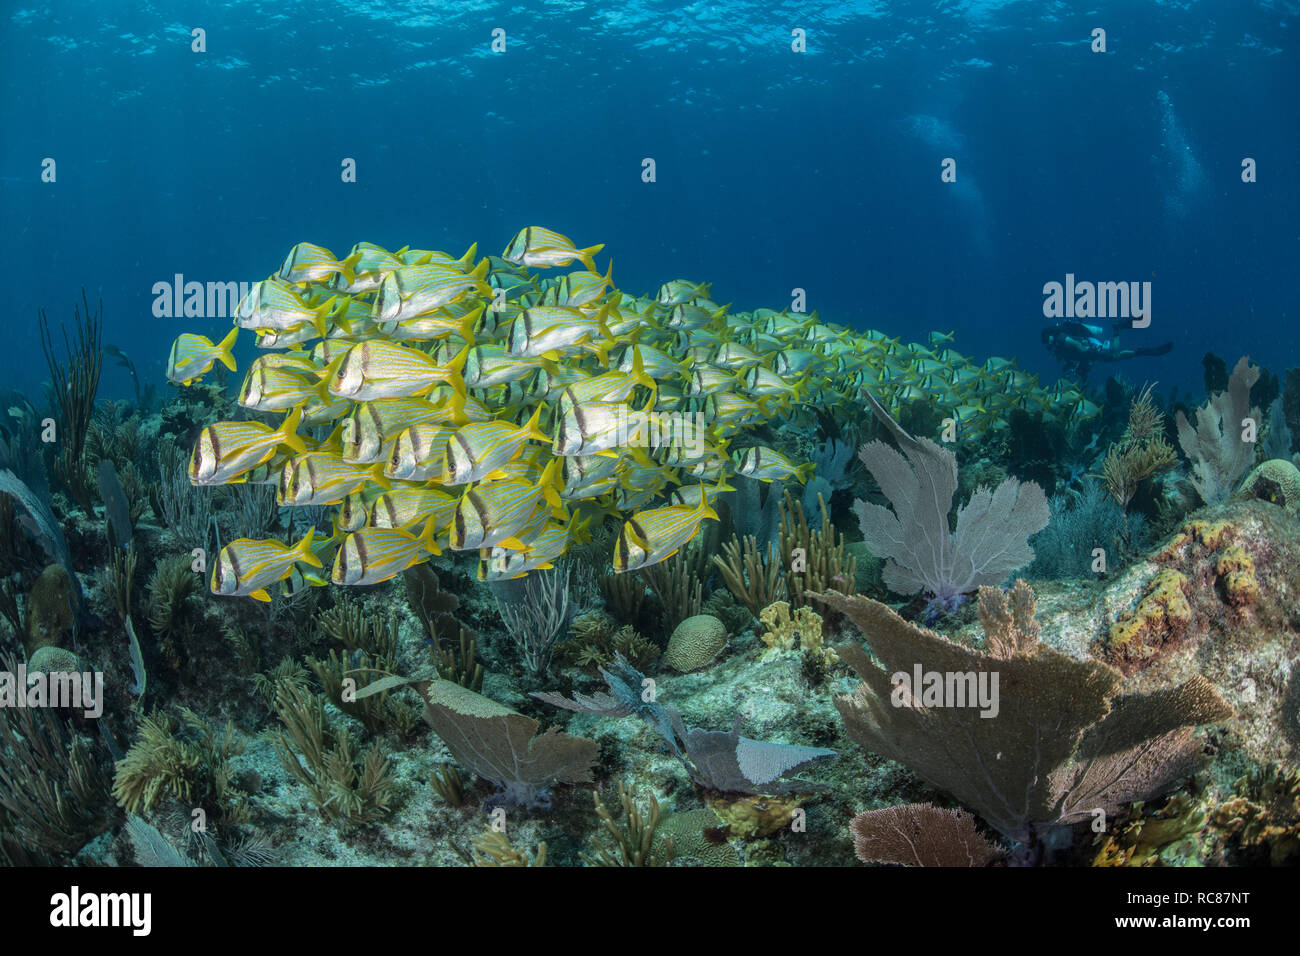 Reef life, diver in background, Alacranes, Campeche, Mexico Stock Photo